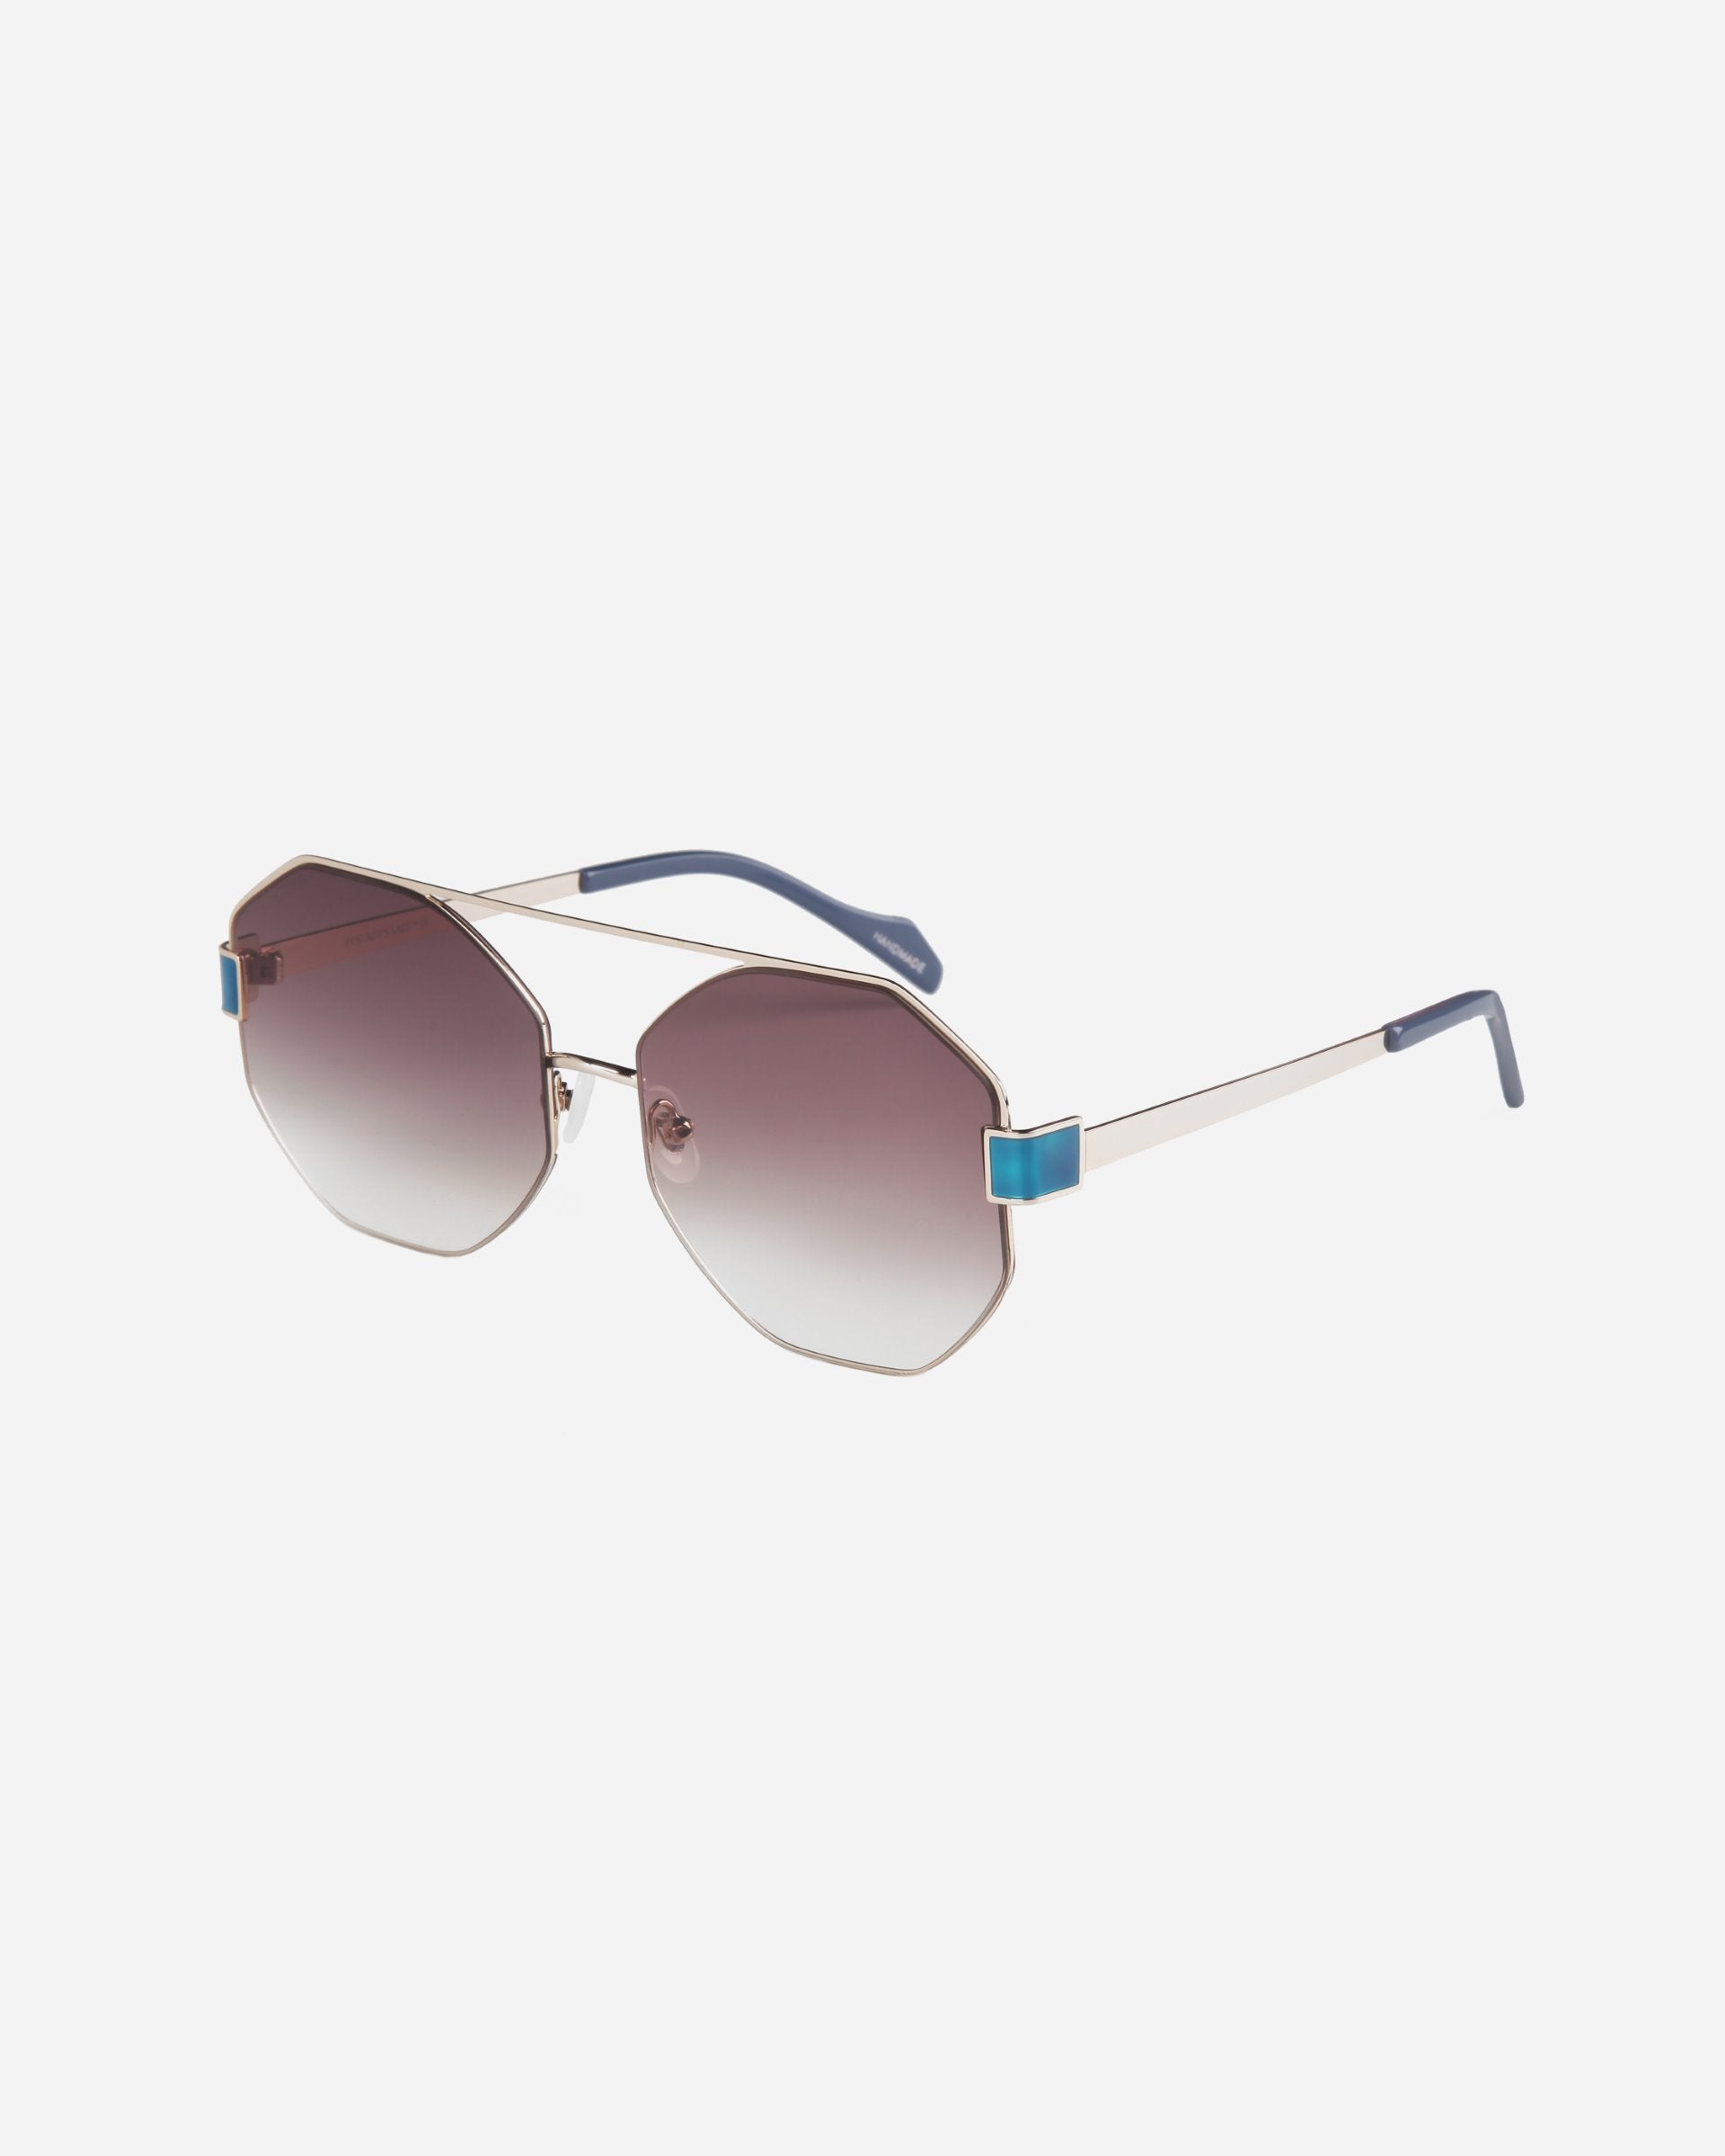 A pair of For Art's Sake® Mania sunglasses with stainless steel, hexagonal frames and gradient nylon lenses that transition from dark at the top to lighter at the bottom. The temples are thin with blue tips. The adjustable nosepads are small and clear for comfort.